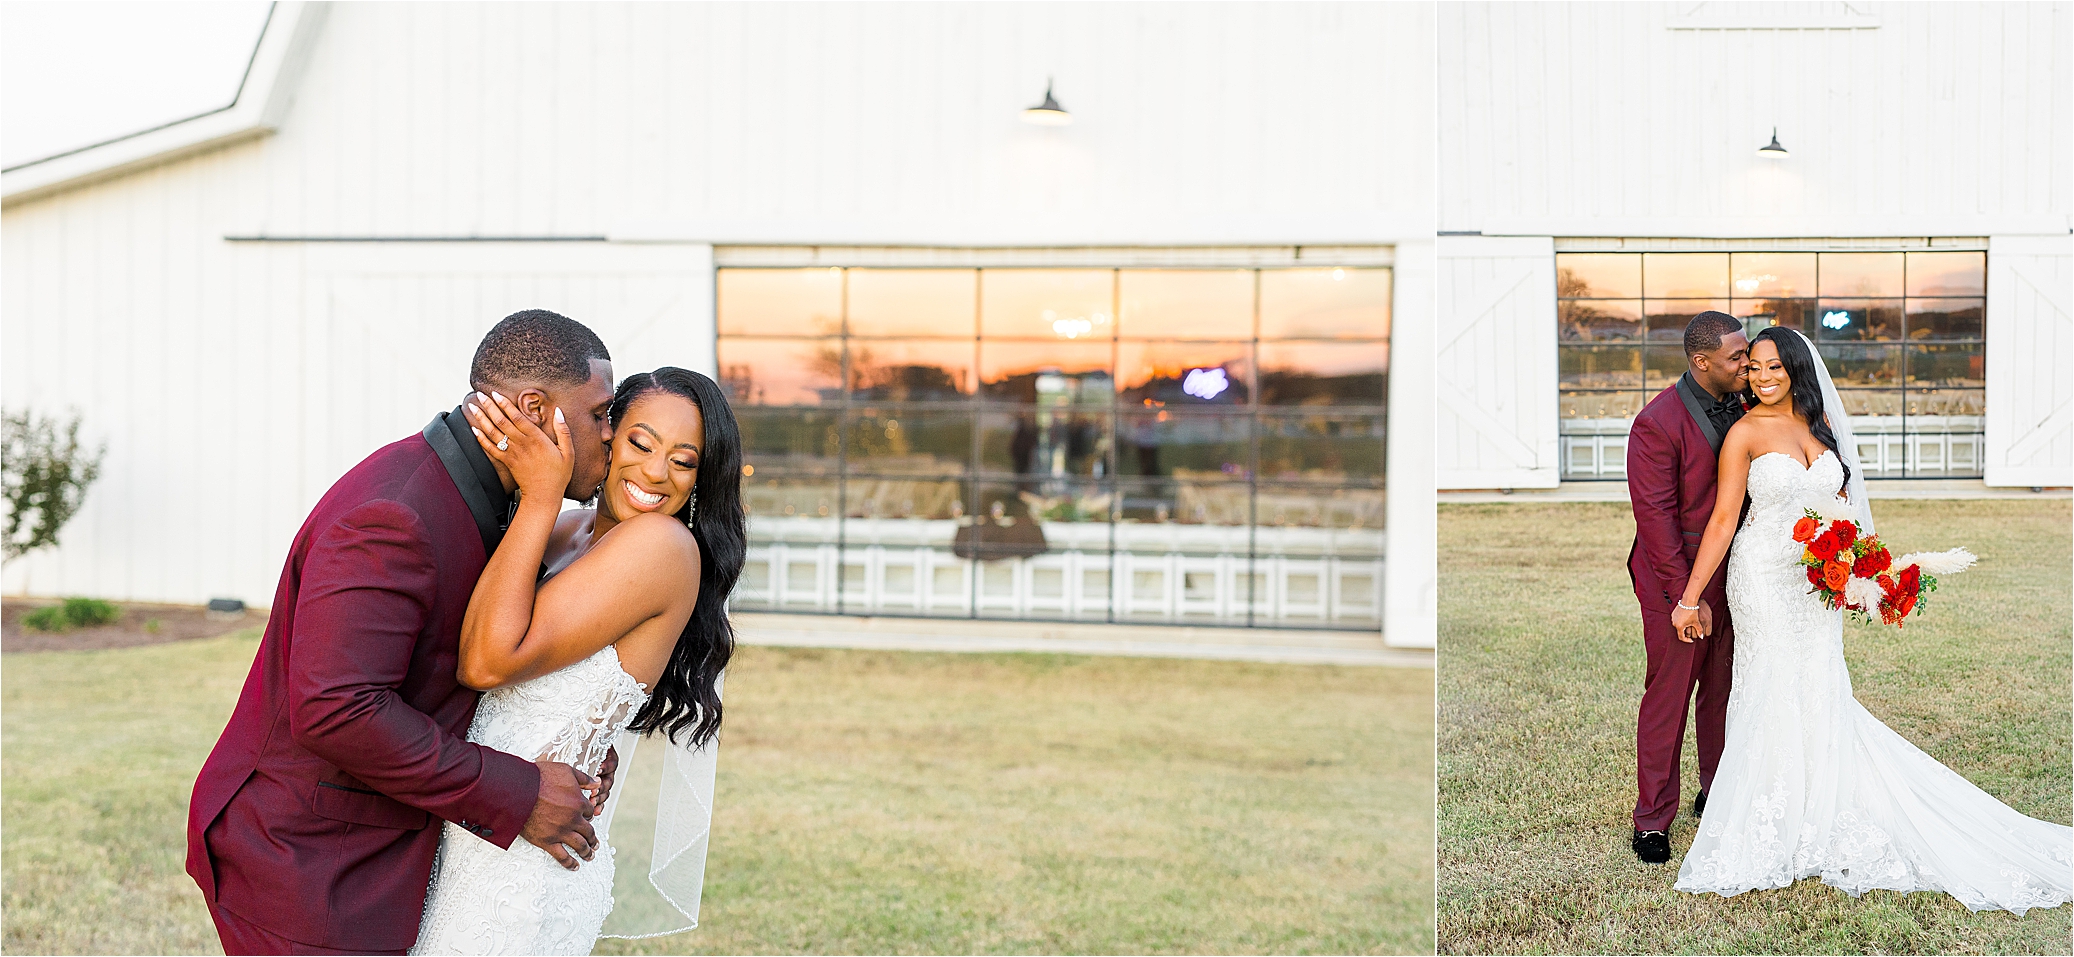 A bride and groom share kisses in front of white barn at The Milestone by Boerne, Texas Photographer Jillian Hogan 